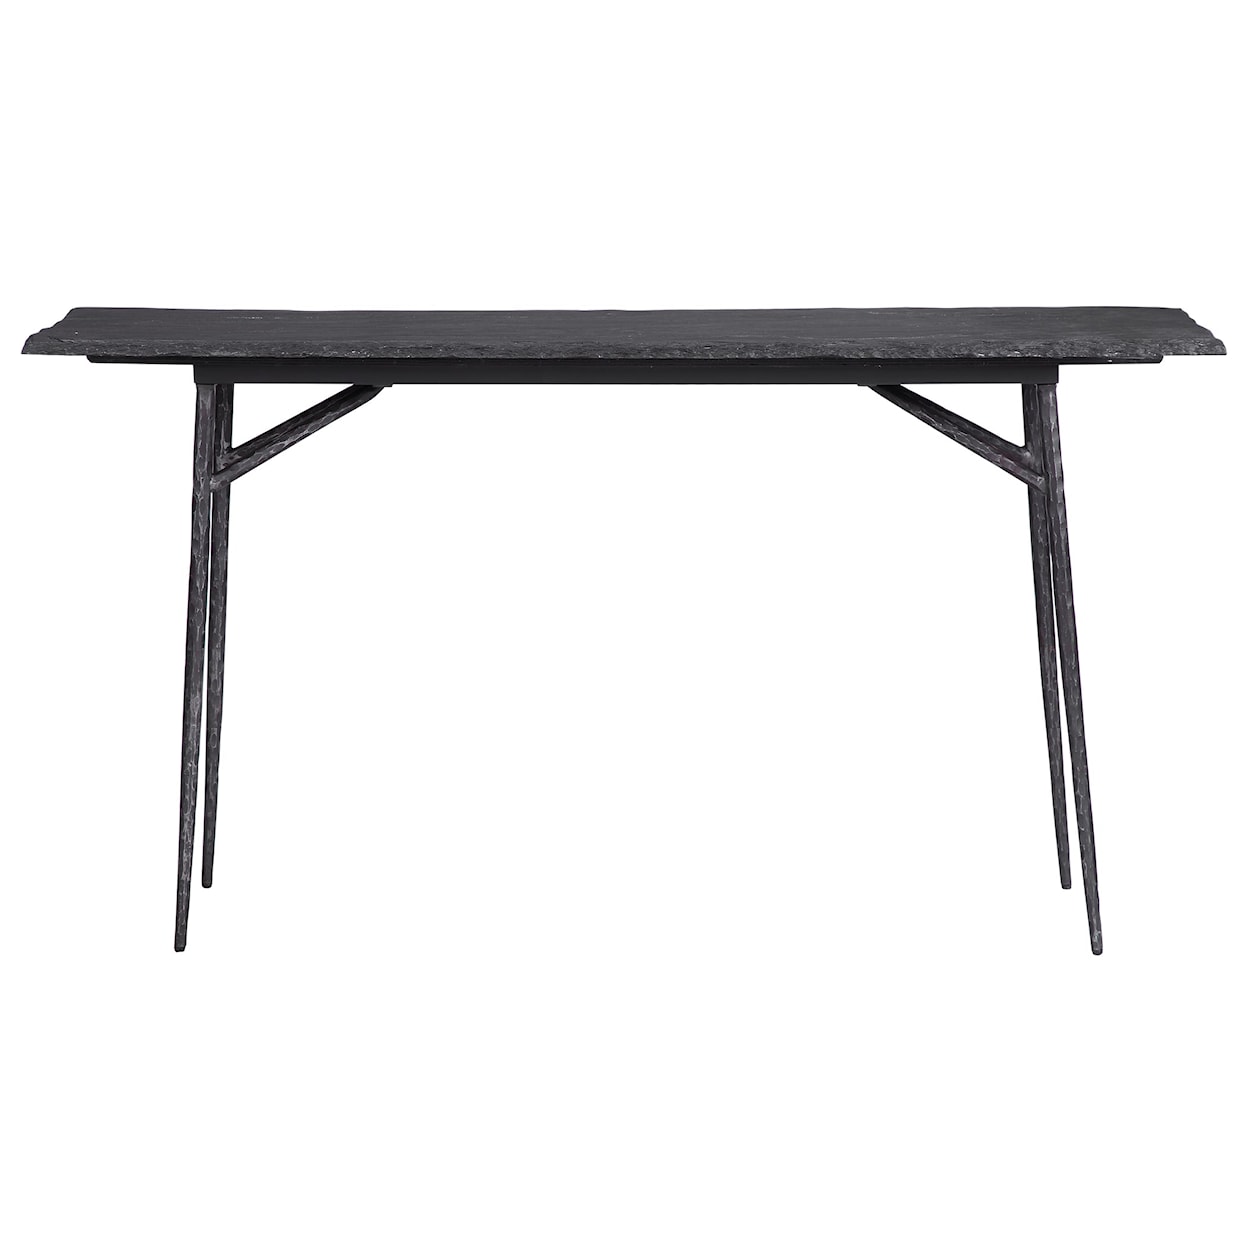 Uttermost Accent Furniture - Occasional Tables Kaduna Slate Console Table